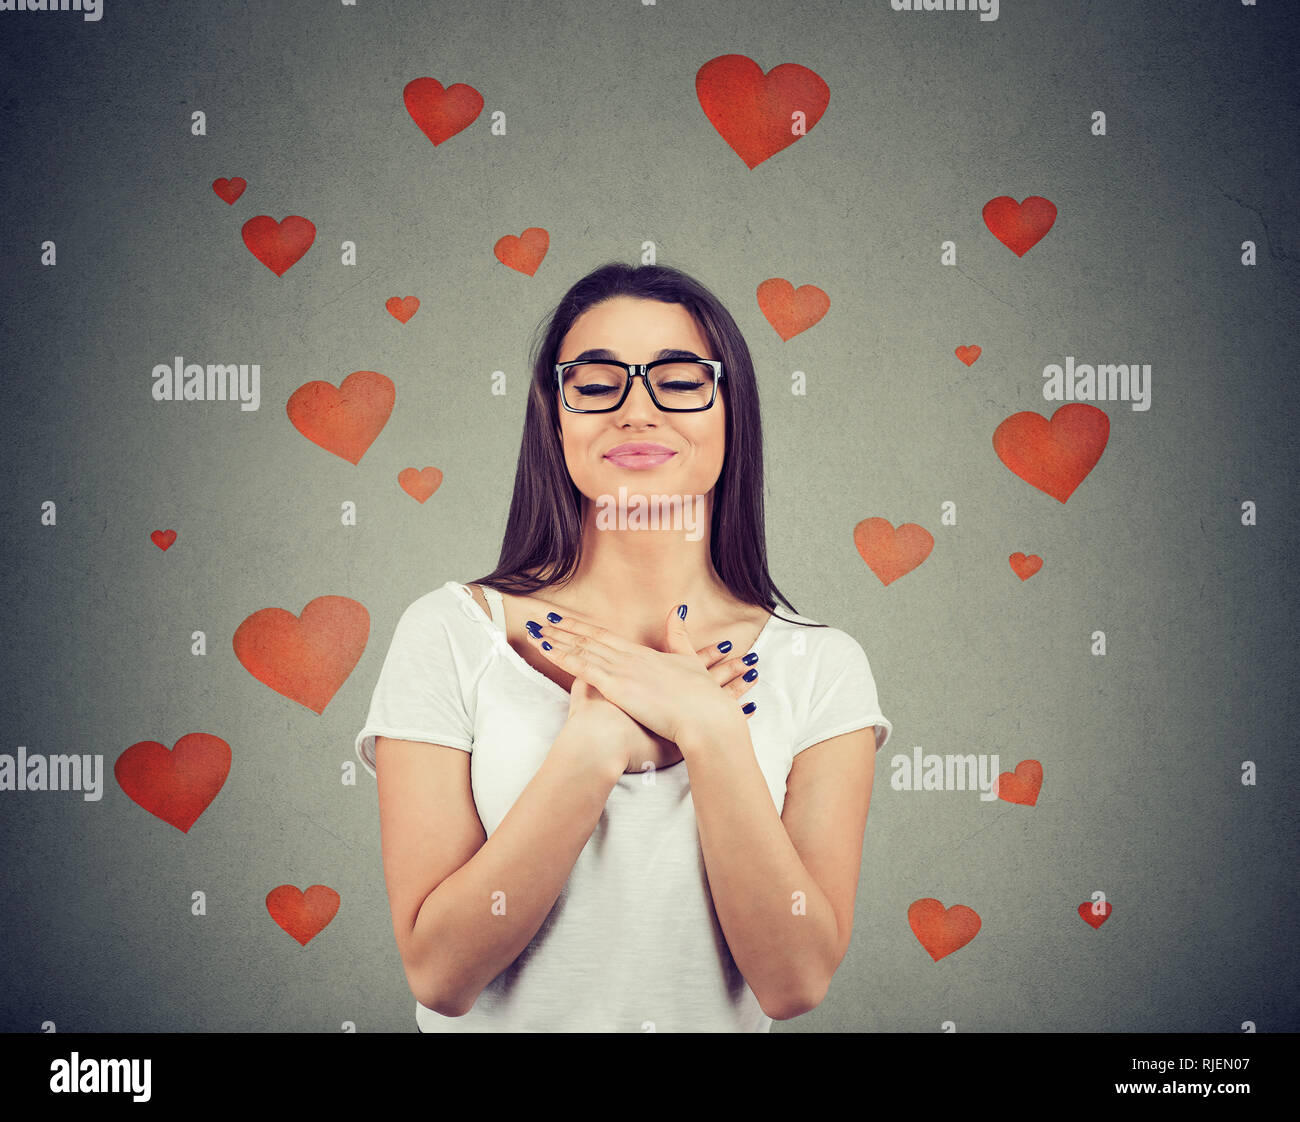 Woman in love with eyes closed keeps hands on chest near heart, shows kindness, expresses sincere emotions, being kind hearted. Stock Photo